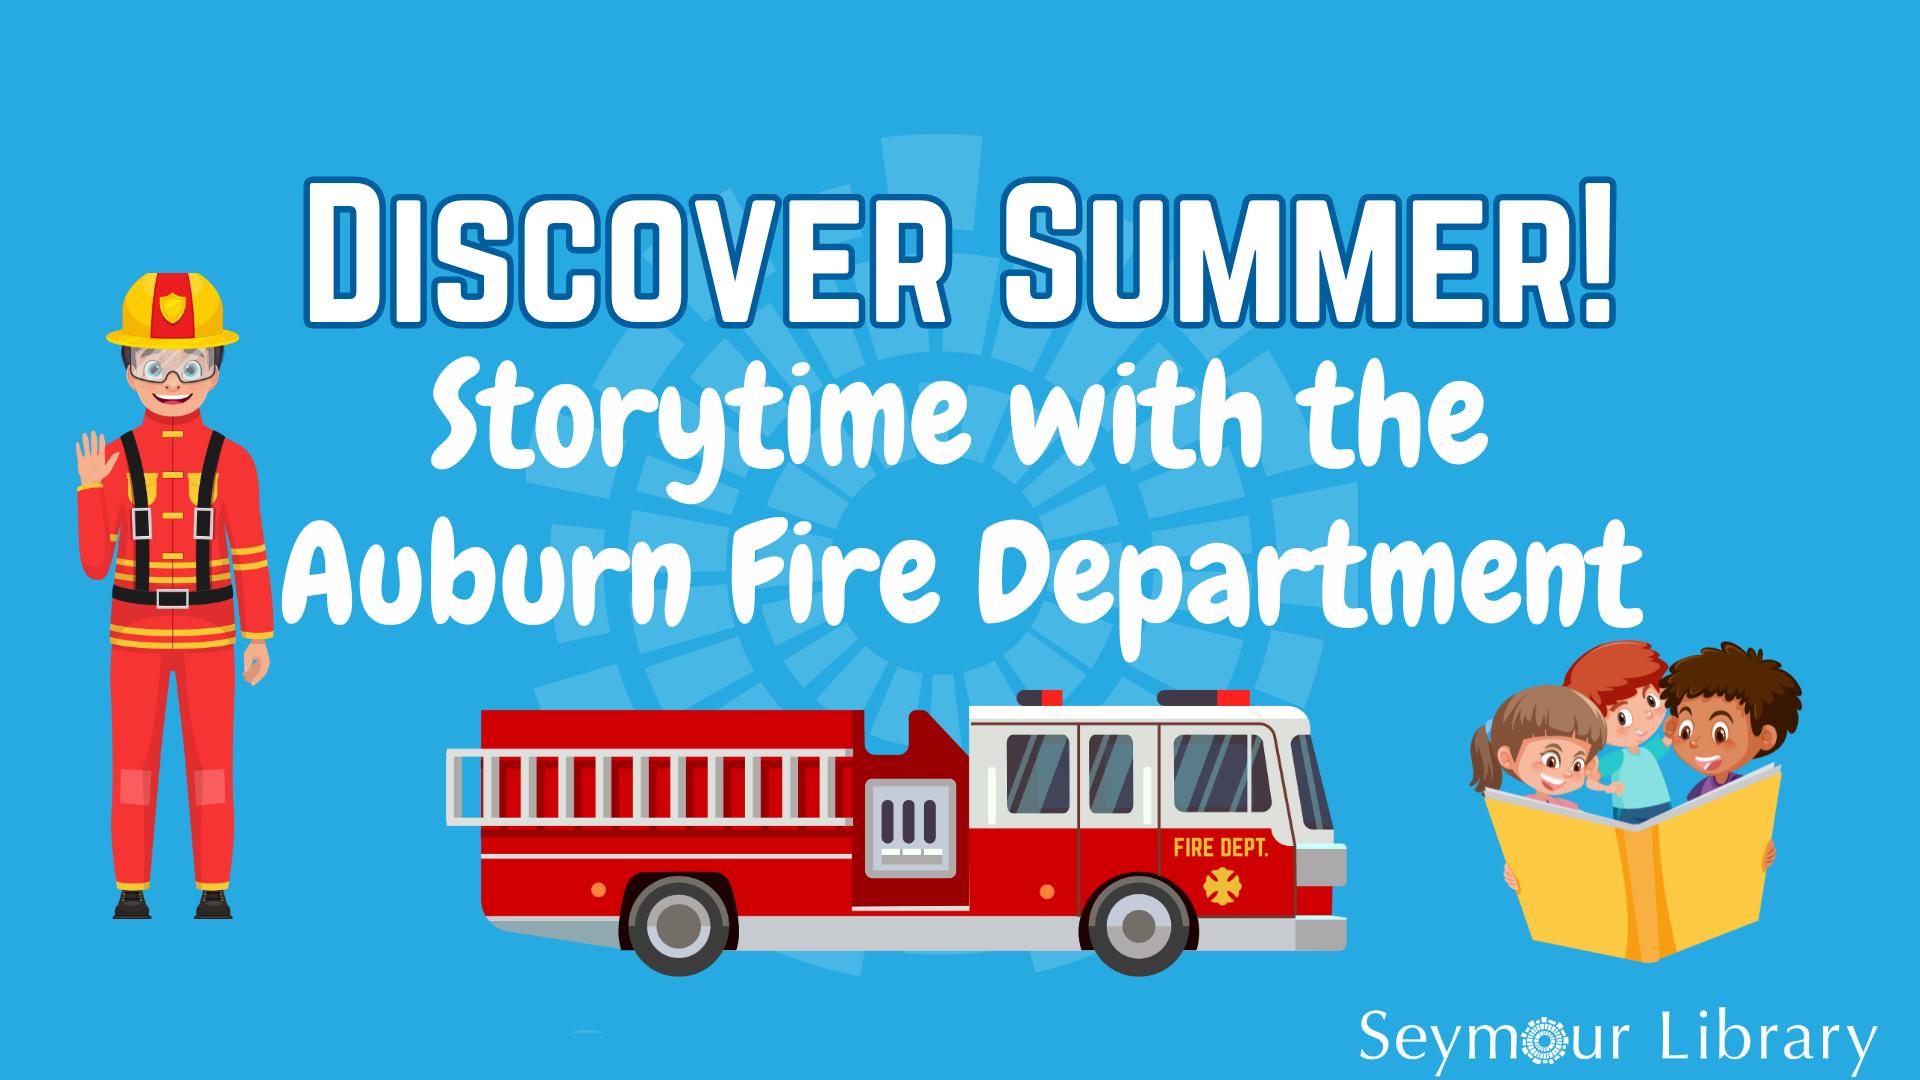 Discover Summer Storytime with the Auburn Fire Department - graphic with logo, children reading, a firetruck , and a firefighter waving.